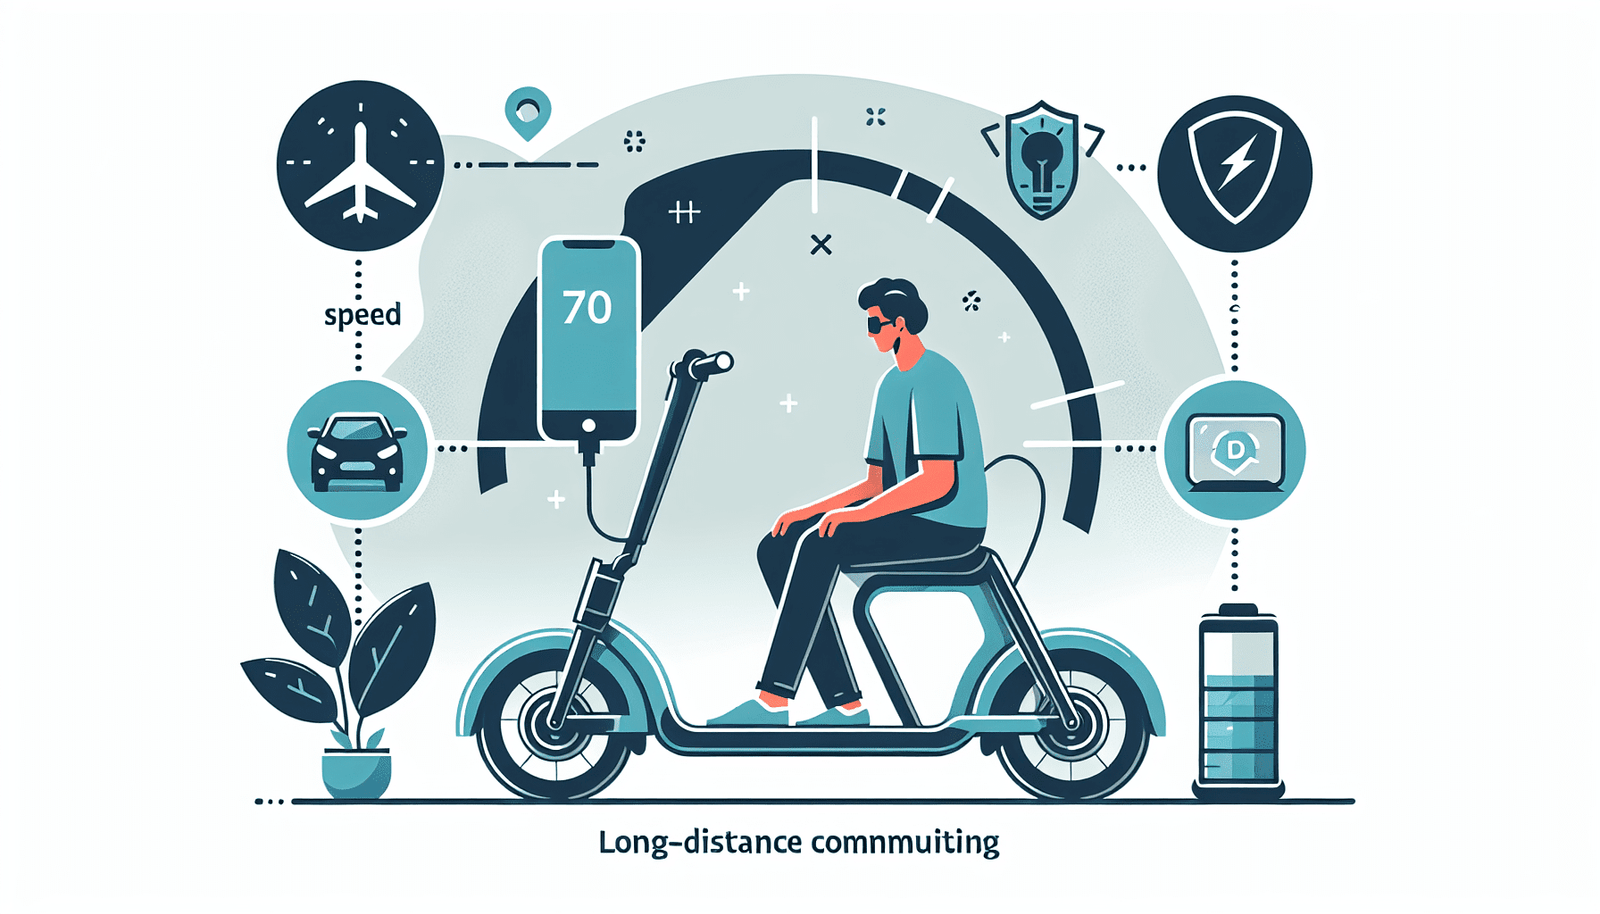 Can I Use My Electric Scooter For Long-distance Commuting?